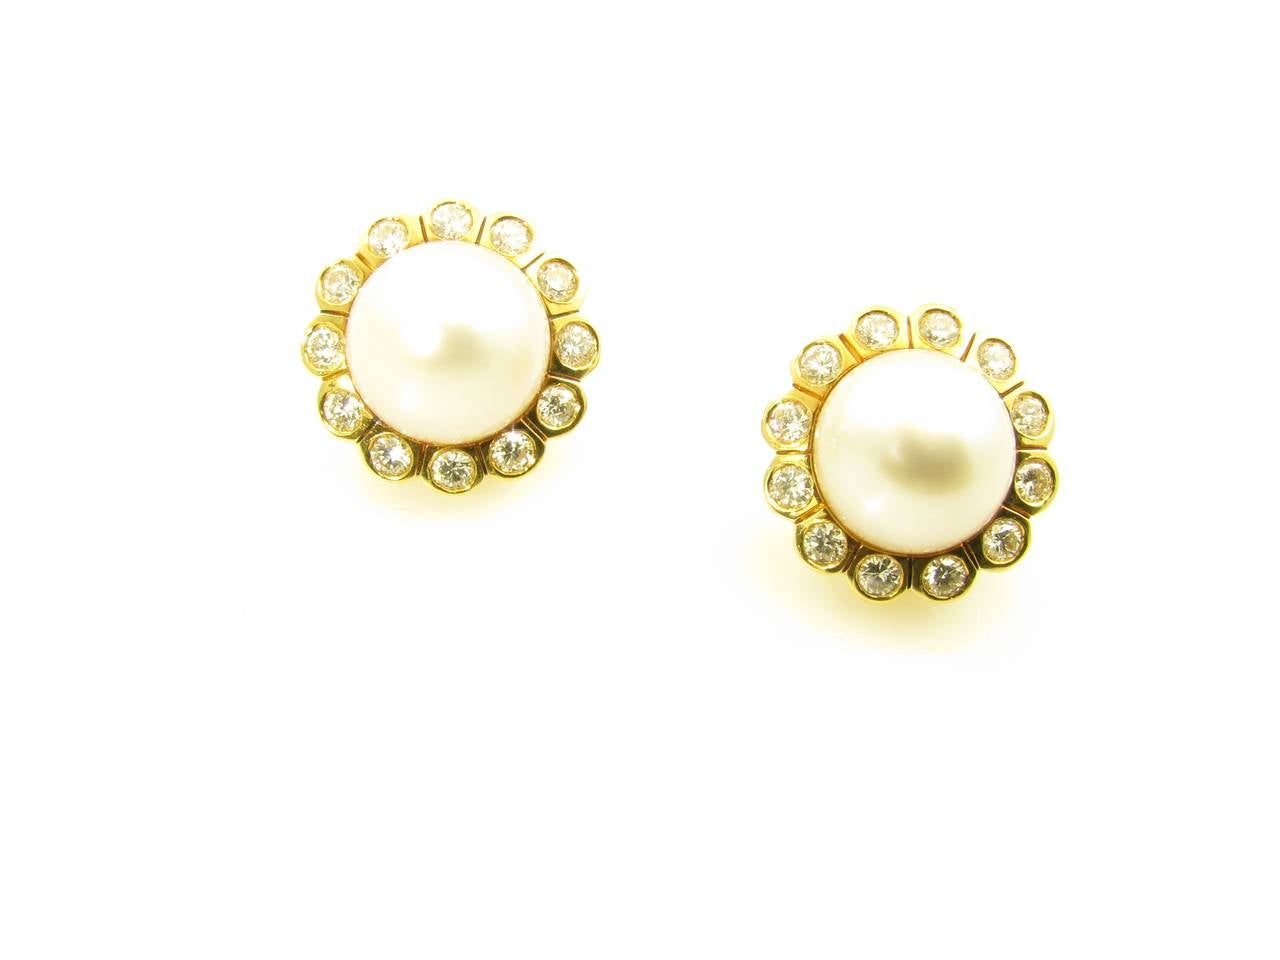 A pair of 18 karat yellow gold, South Sea pearl and diamond earrings, Signed Webb.  David Webb.  The earrings are each set with a South Sea button pearl measuring approximately 14.3 mm in diameter, within a cluster setting of 12 round brilliant cut